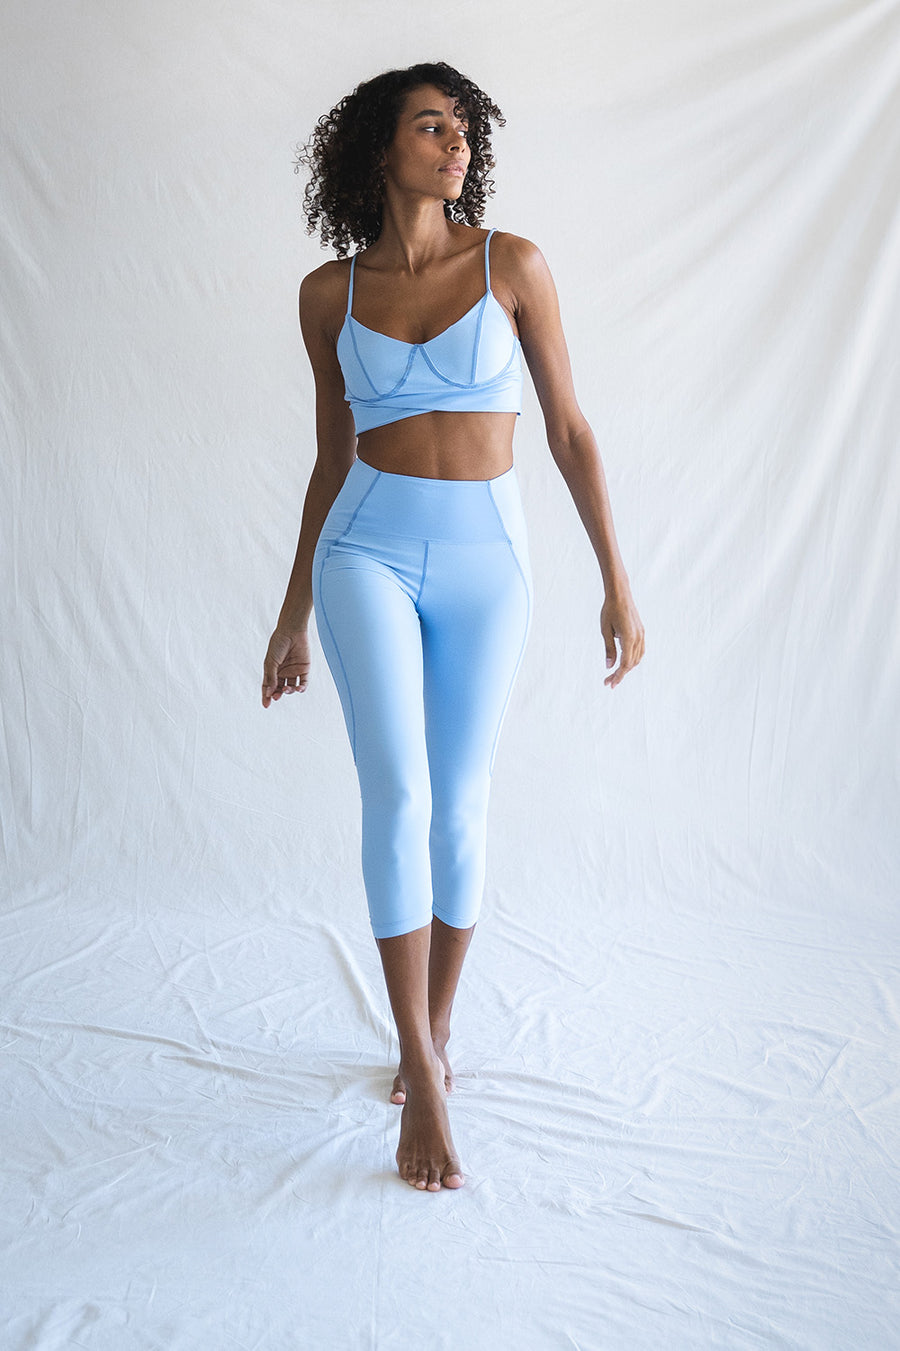 Zola Bustier Top (Sleeveless Workout Sports Crop Top in Blue